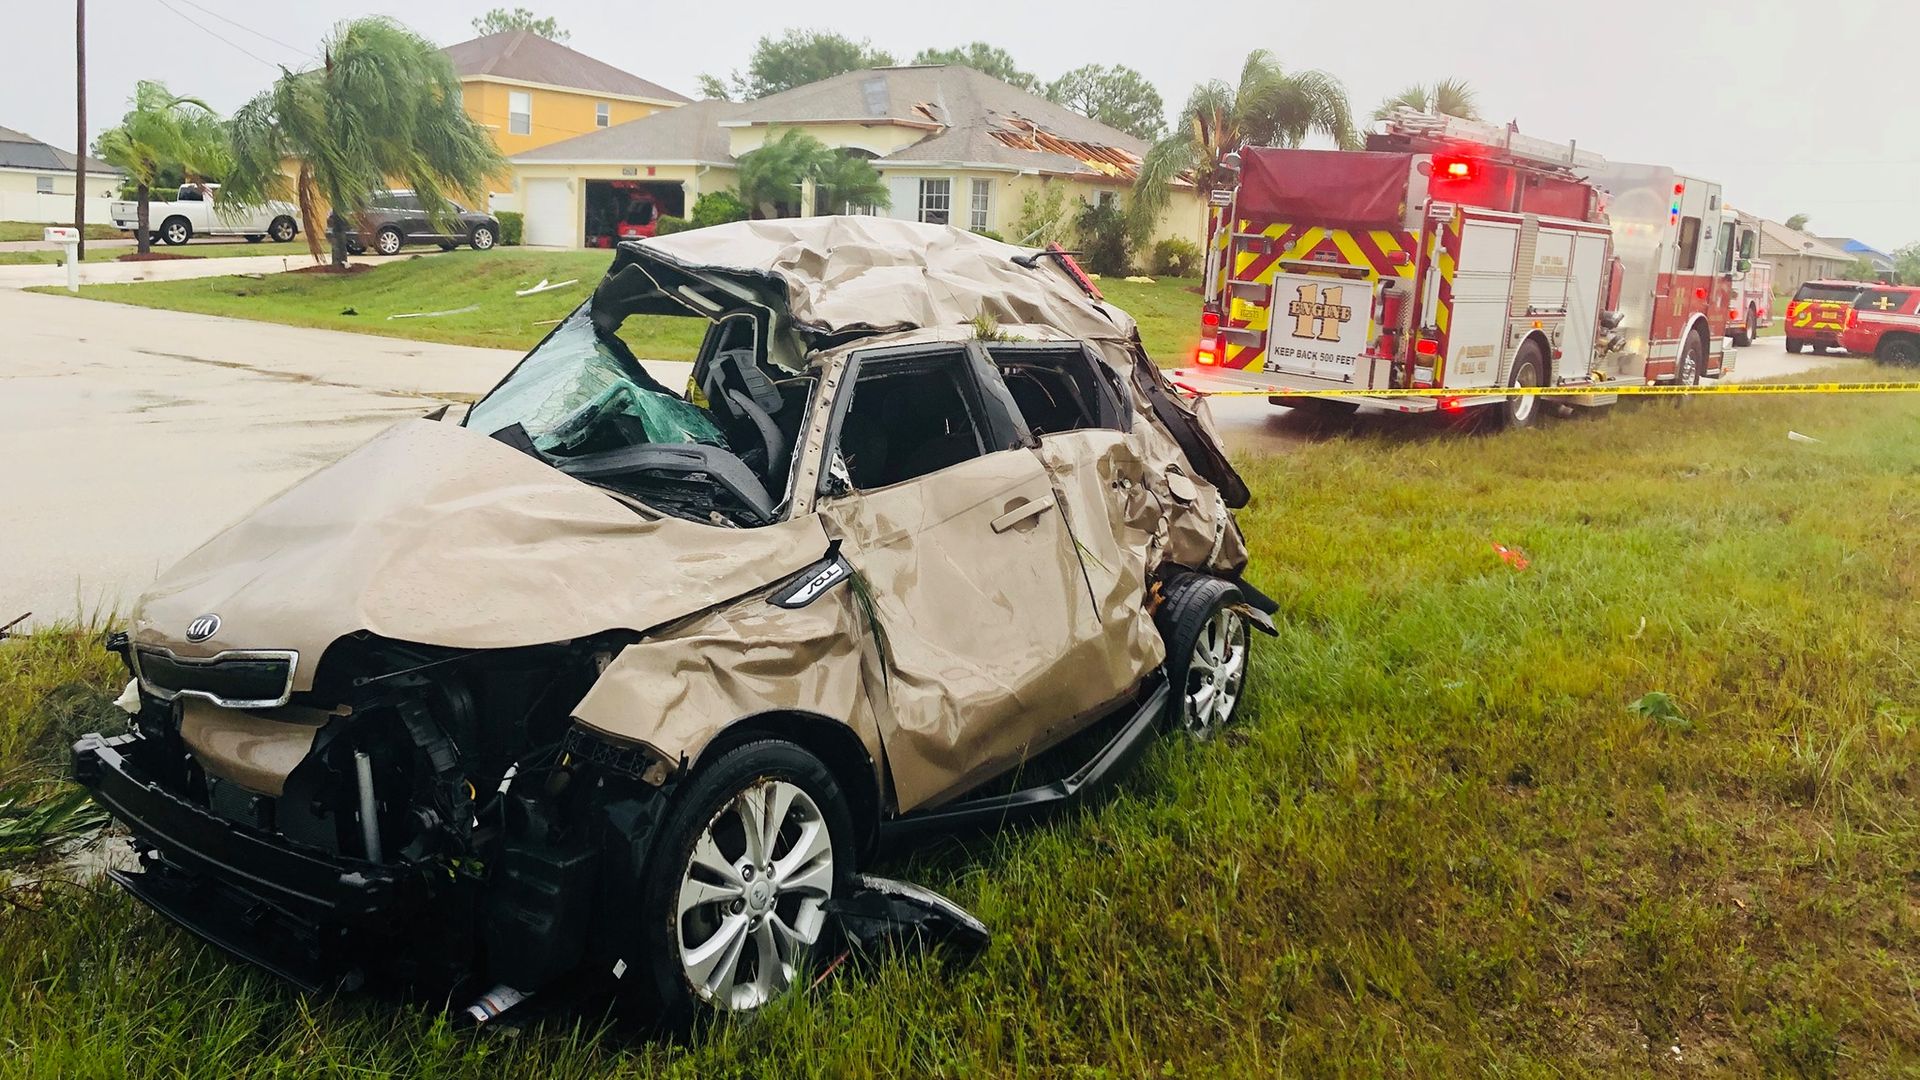 A tornado spawned by Tropical Storm Nestor damaged this car in Cape Coral, Florida, on Saturday, Oct. 19, 2019.